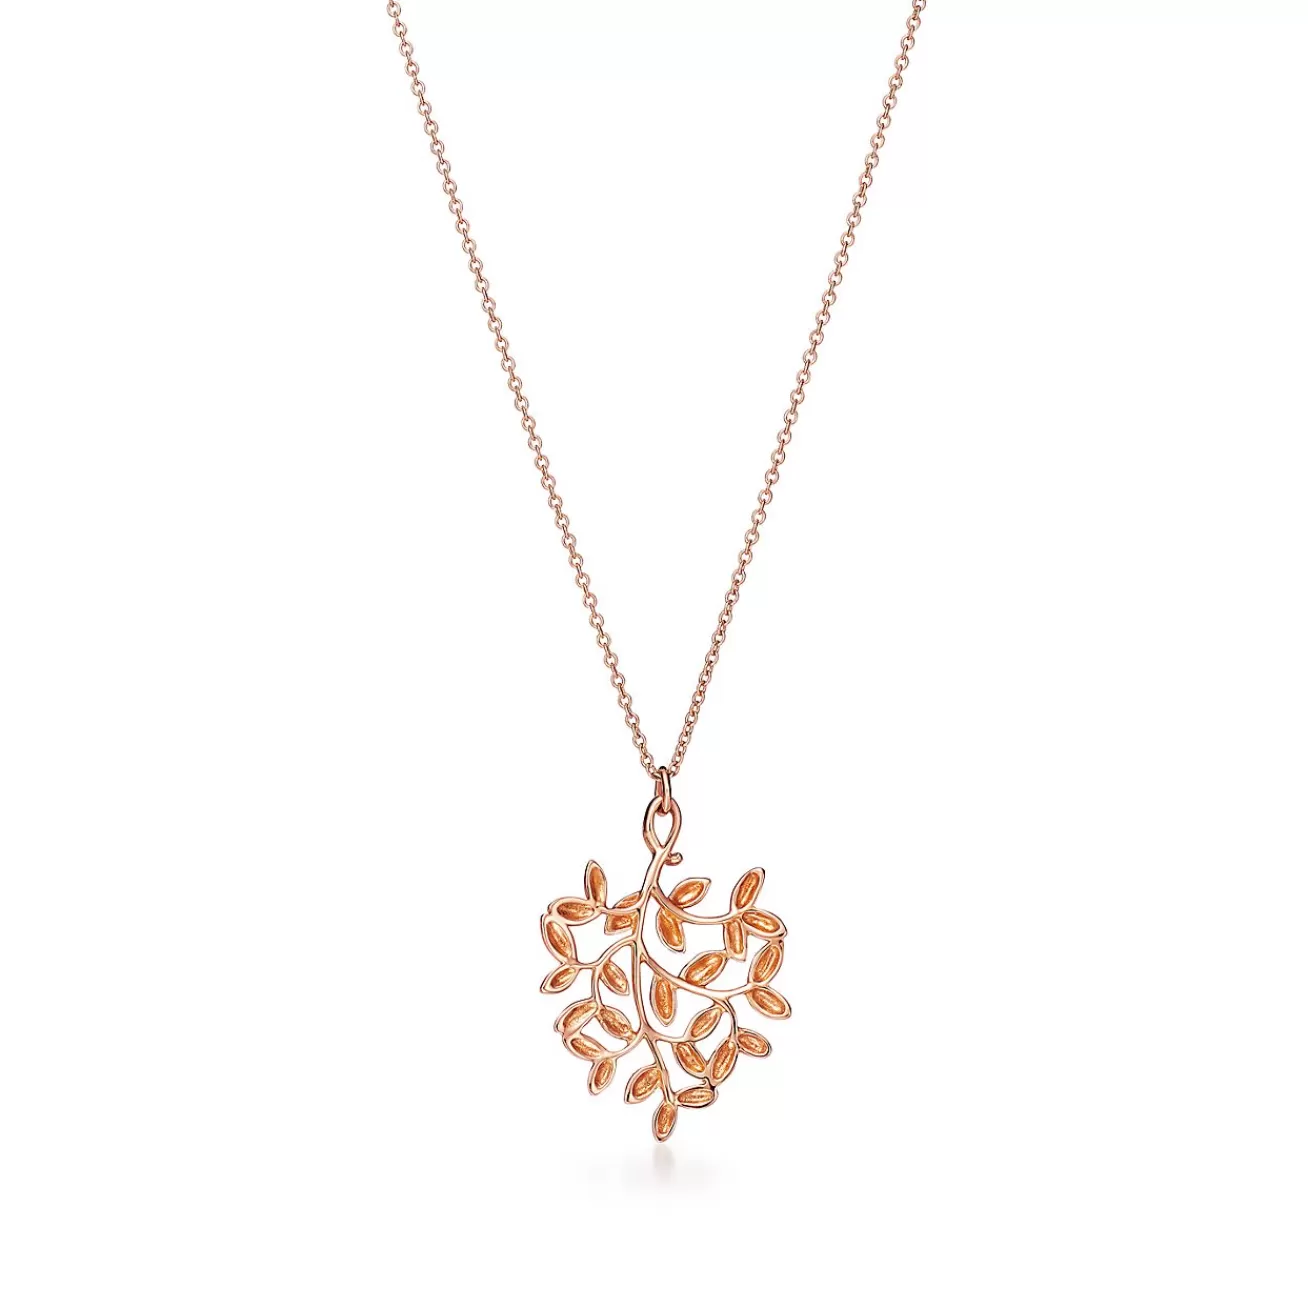 Tiffany & Co. Paloma Picasso® Olive Leaf pendant in 18k rose gold, small. | ^ Necklaces & Pendants | Rose Gold Jewelry